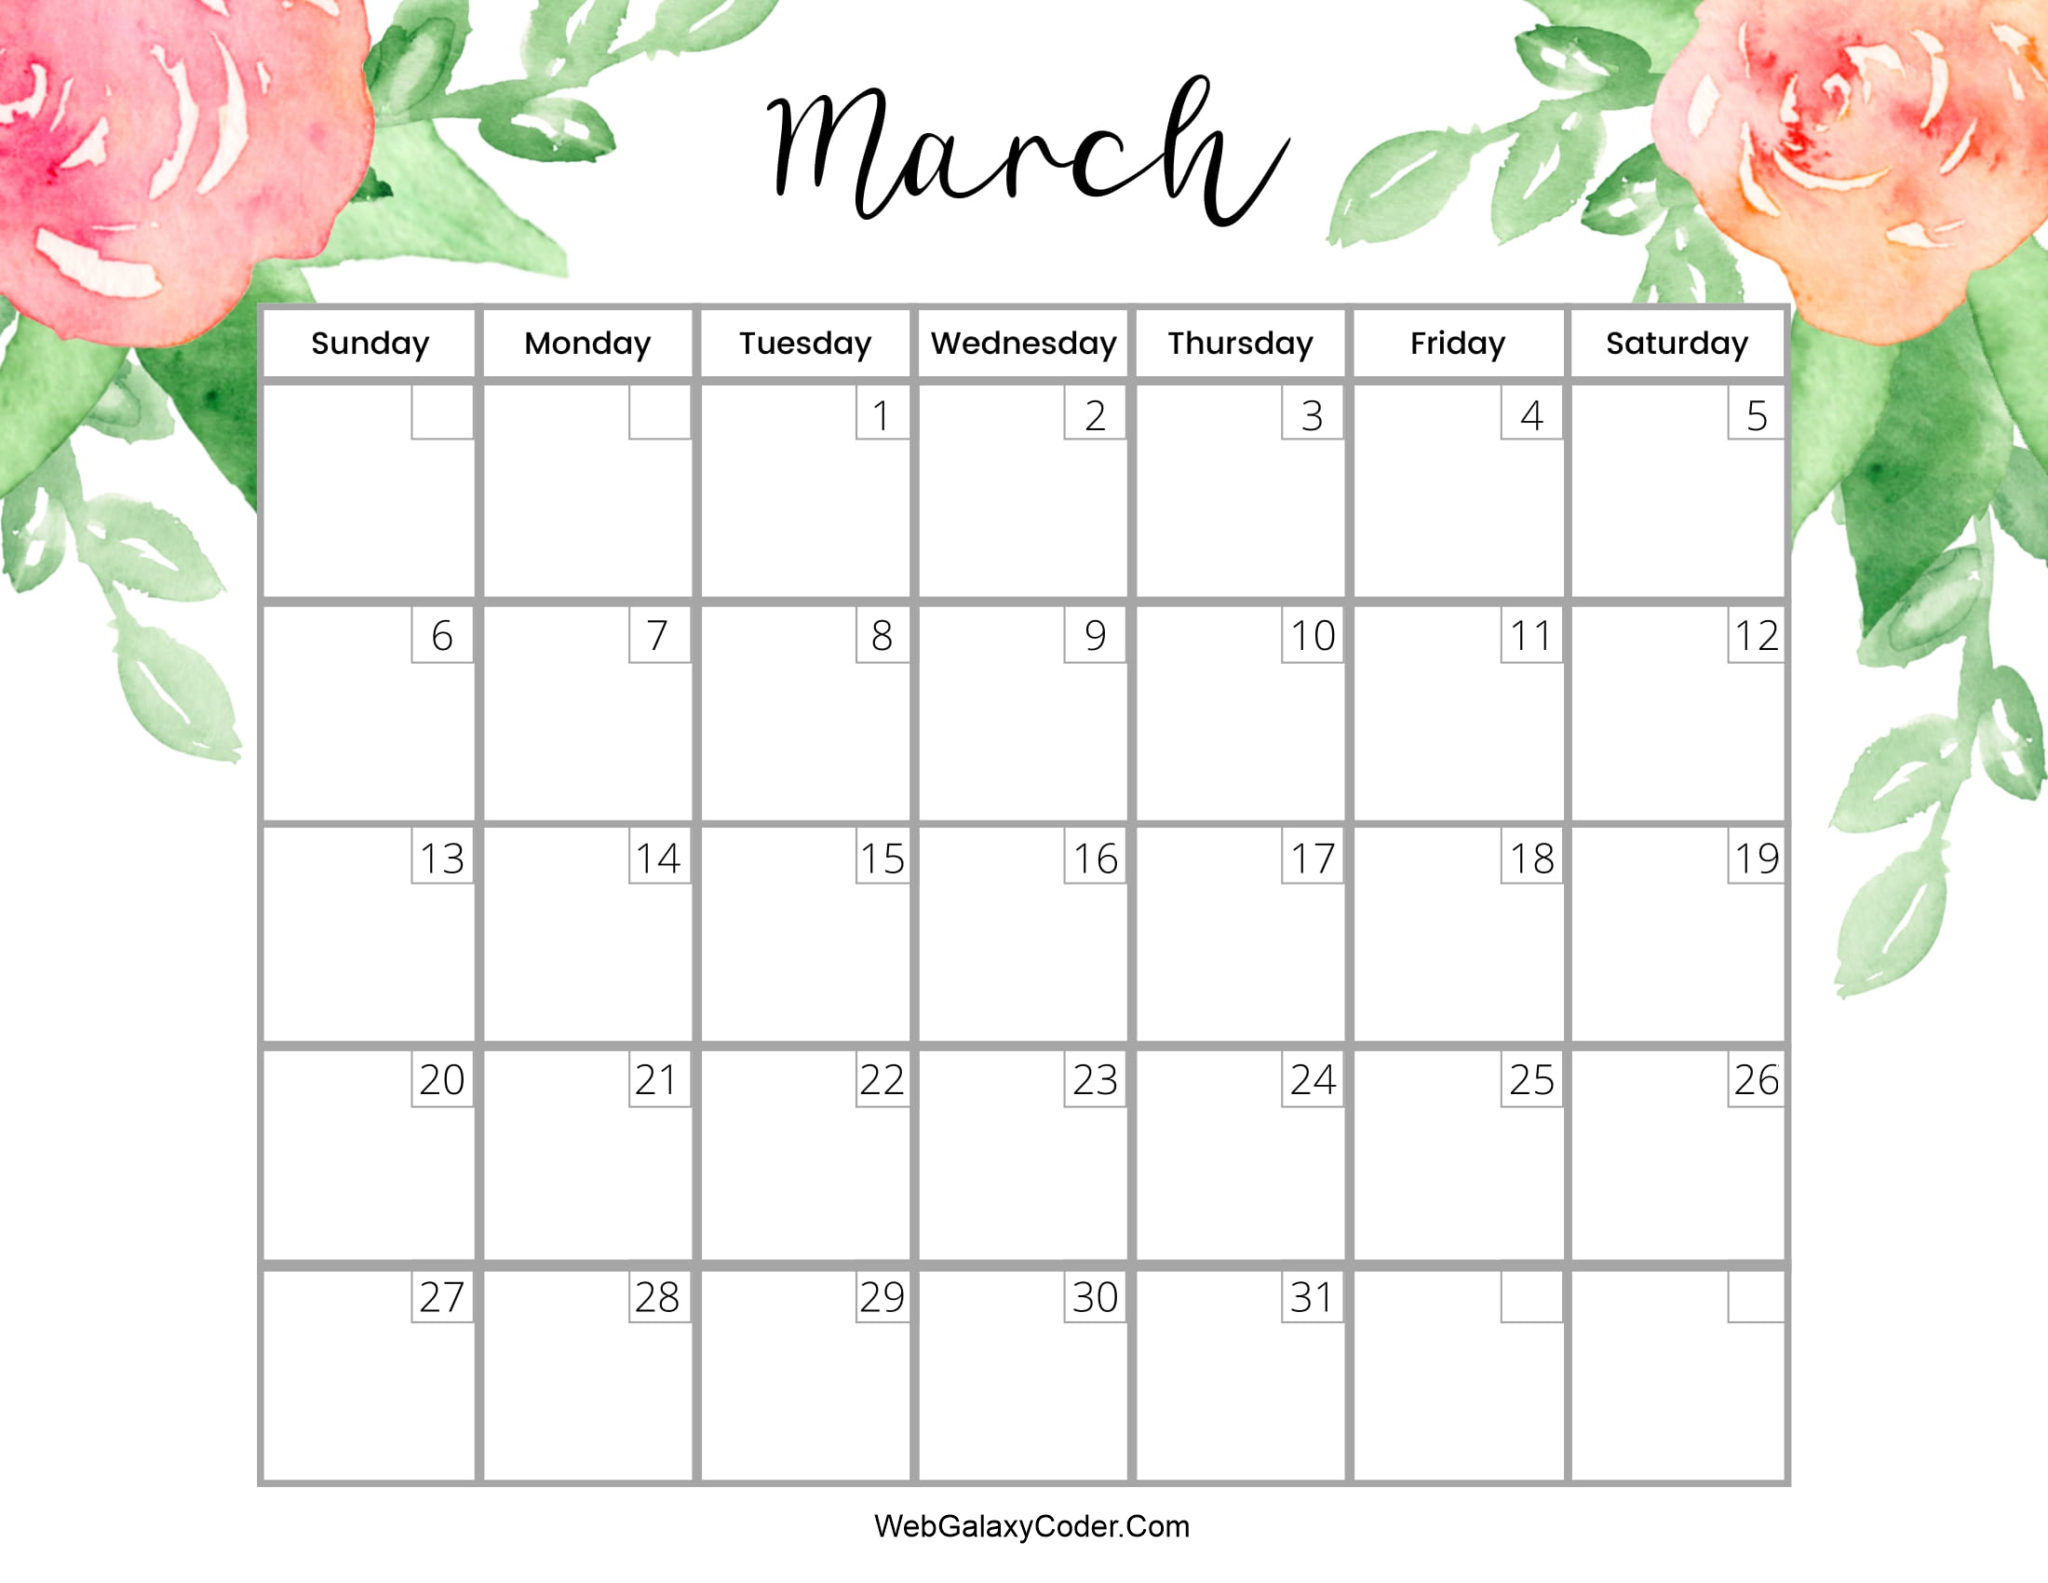 Collect March 2022 Calendar Image